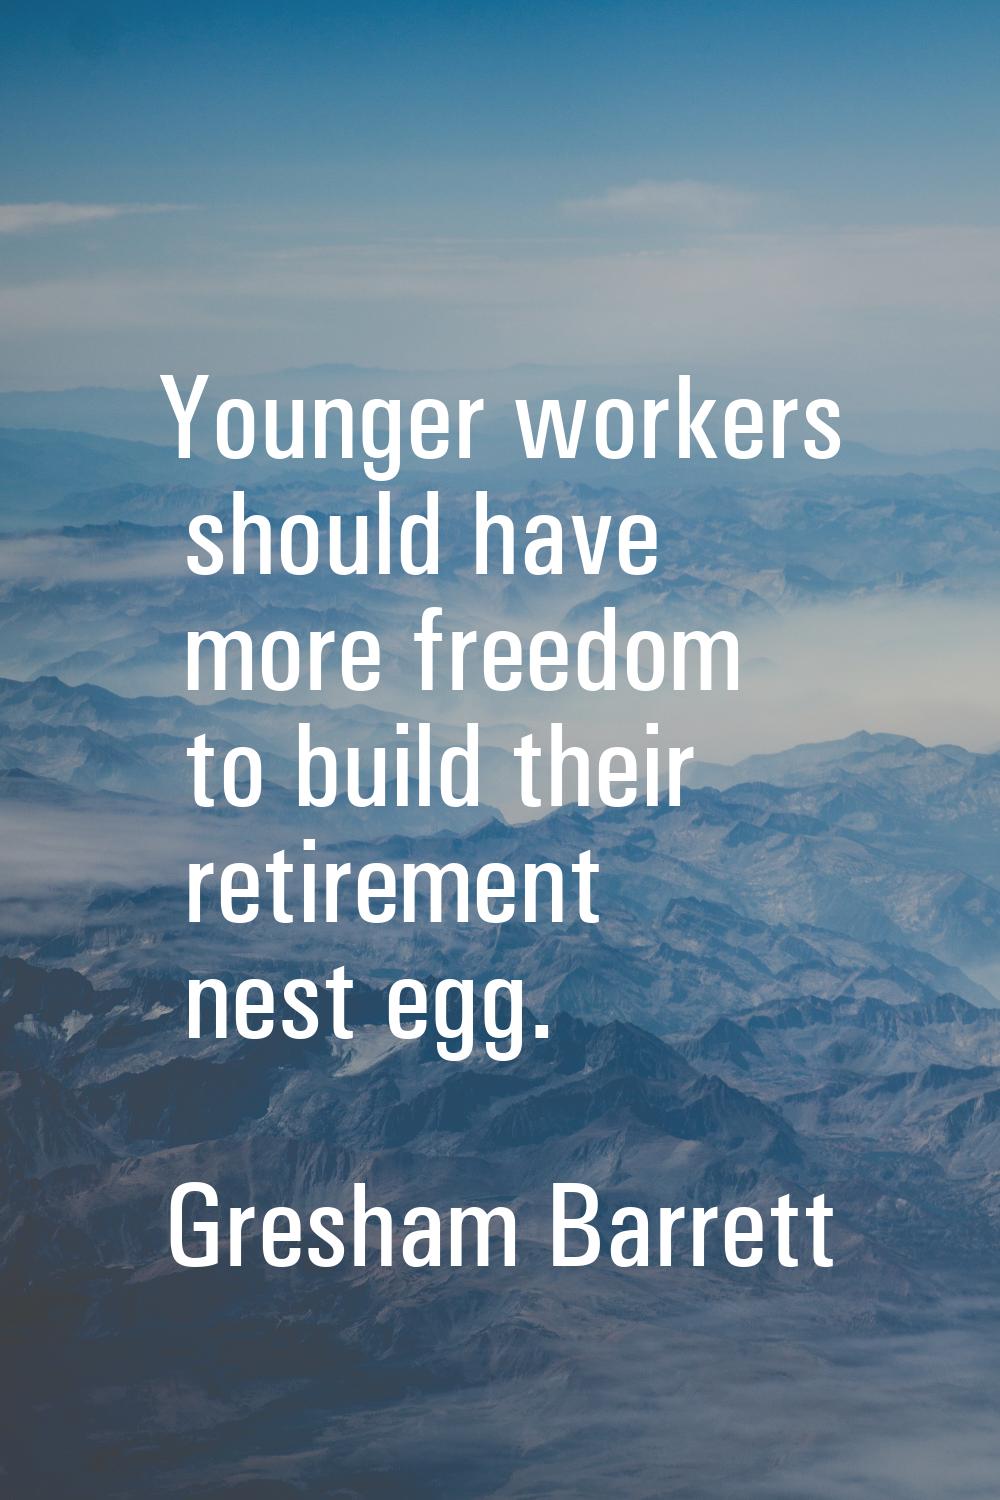 Younger workers should have more freedom to build their retirement nest egg.